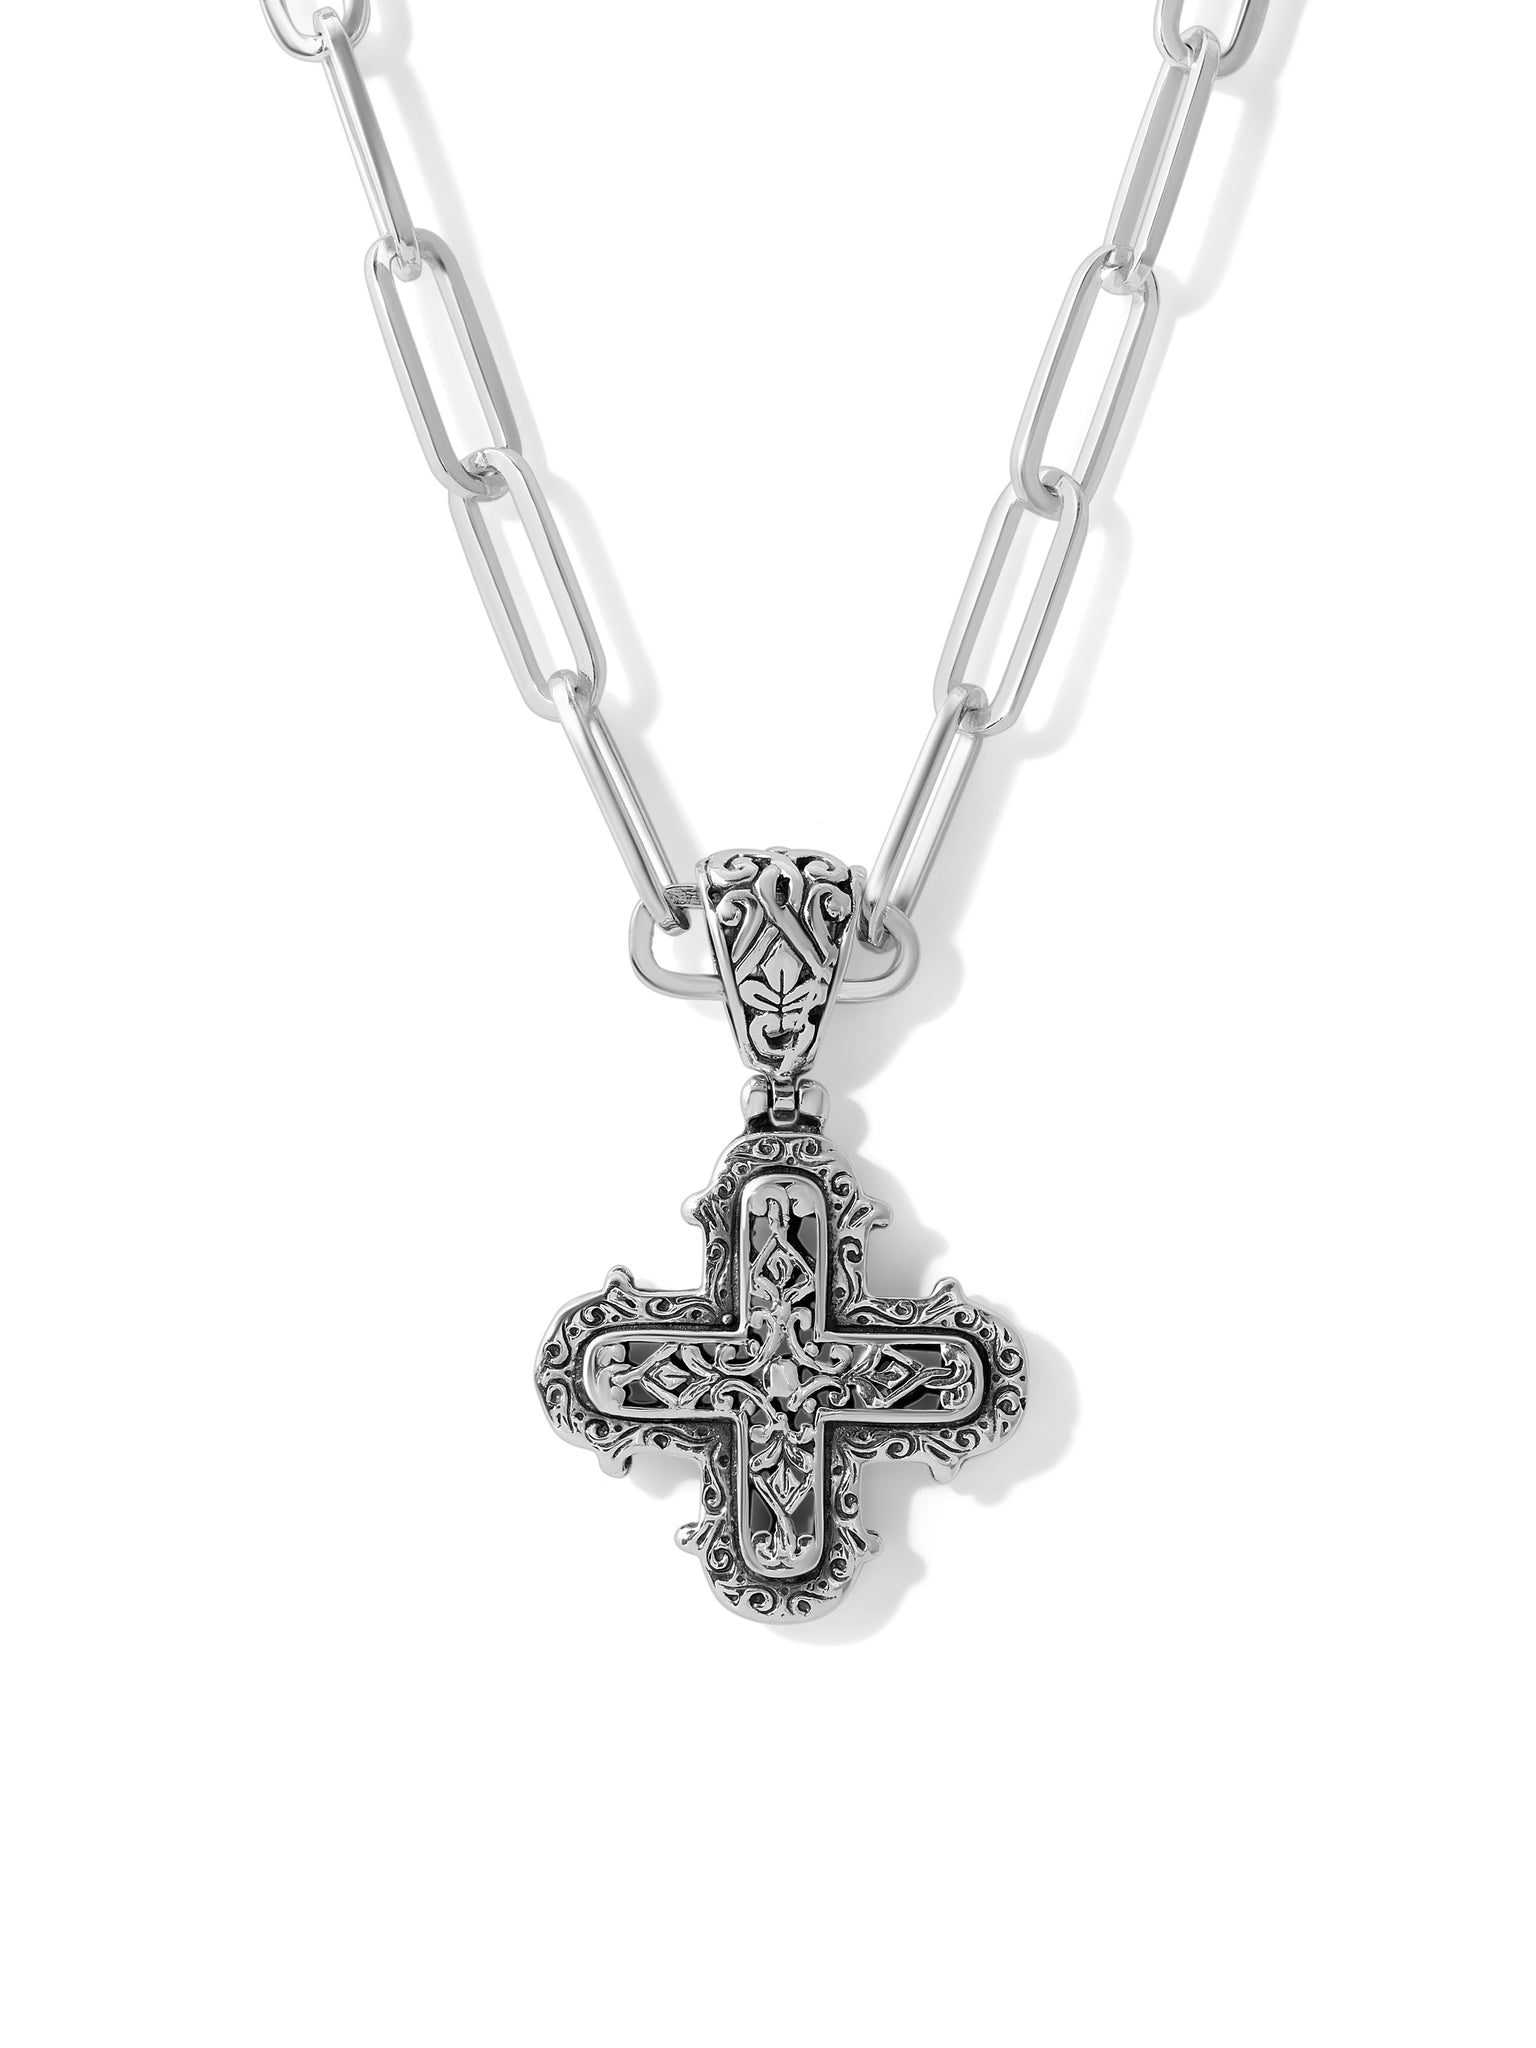 The Chloe Cross Necklace